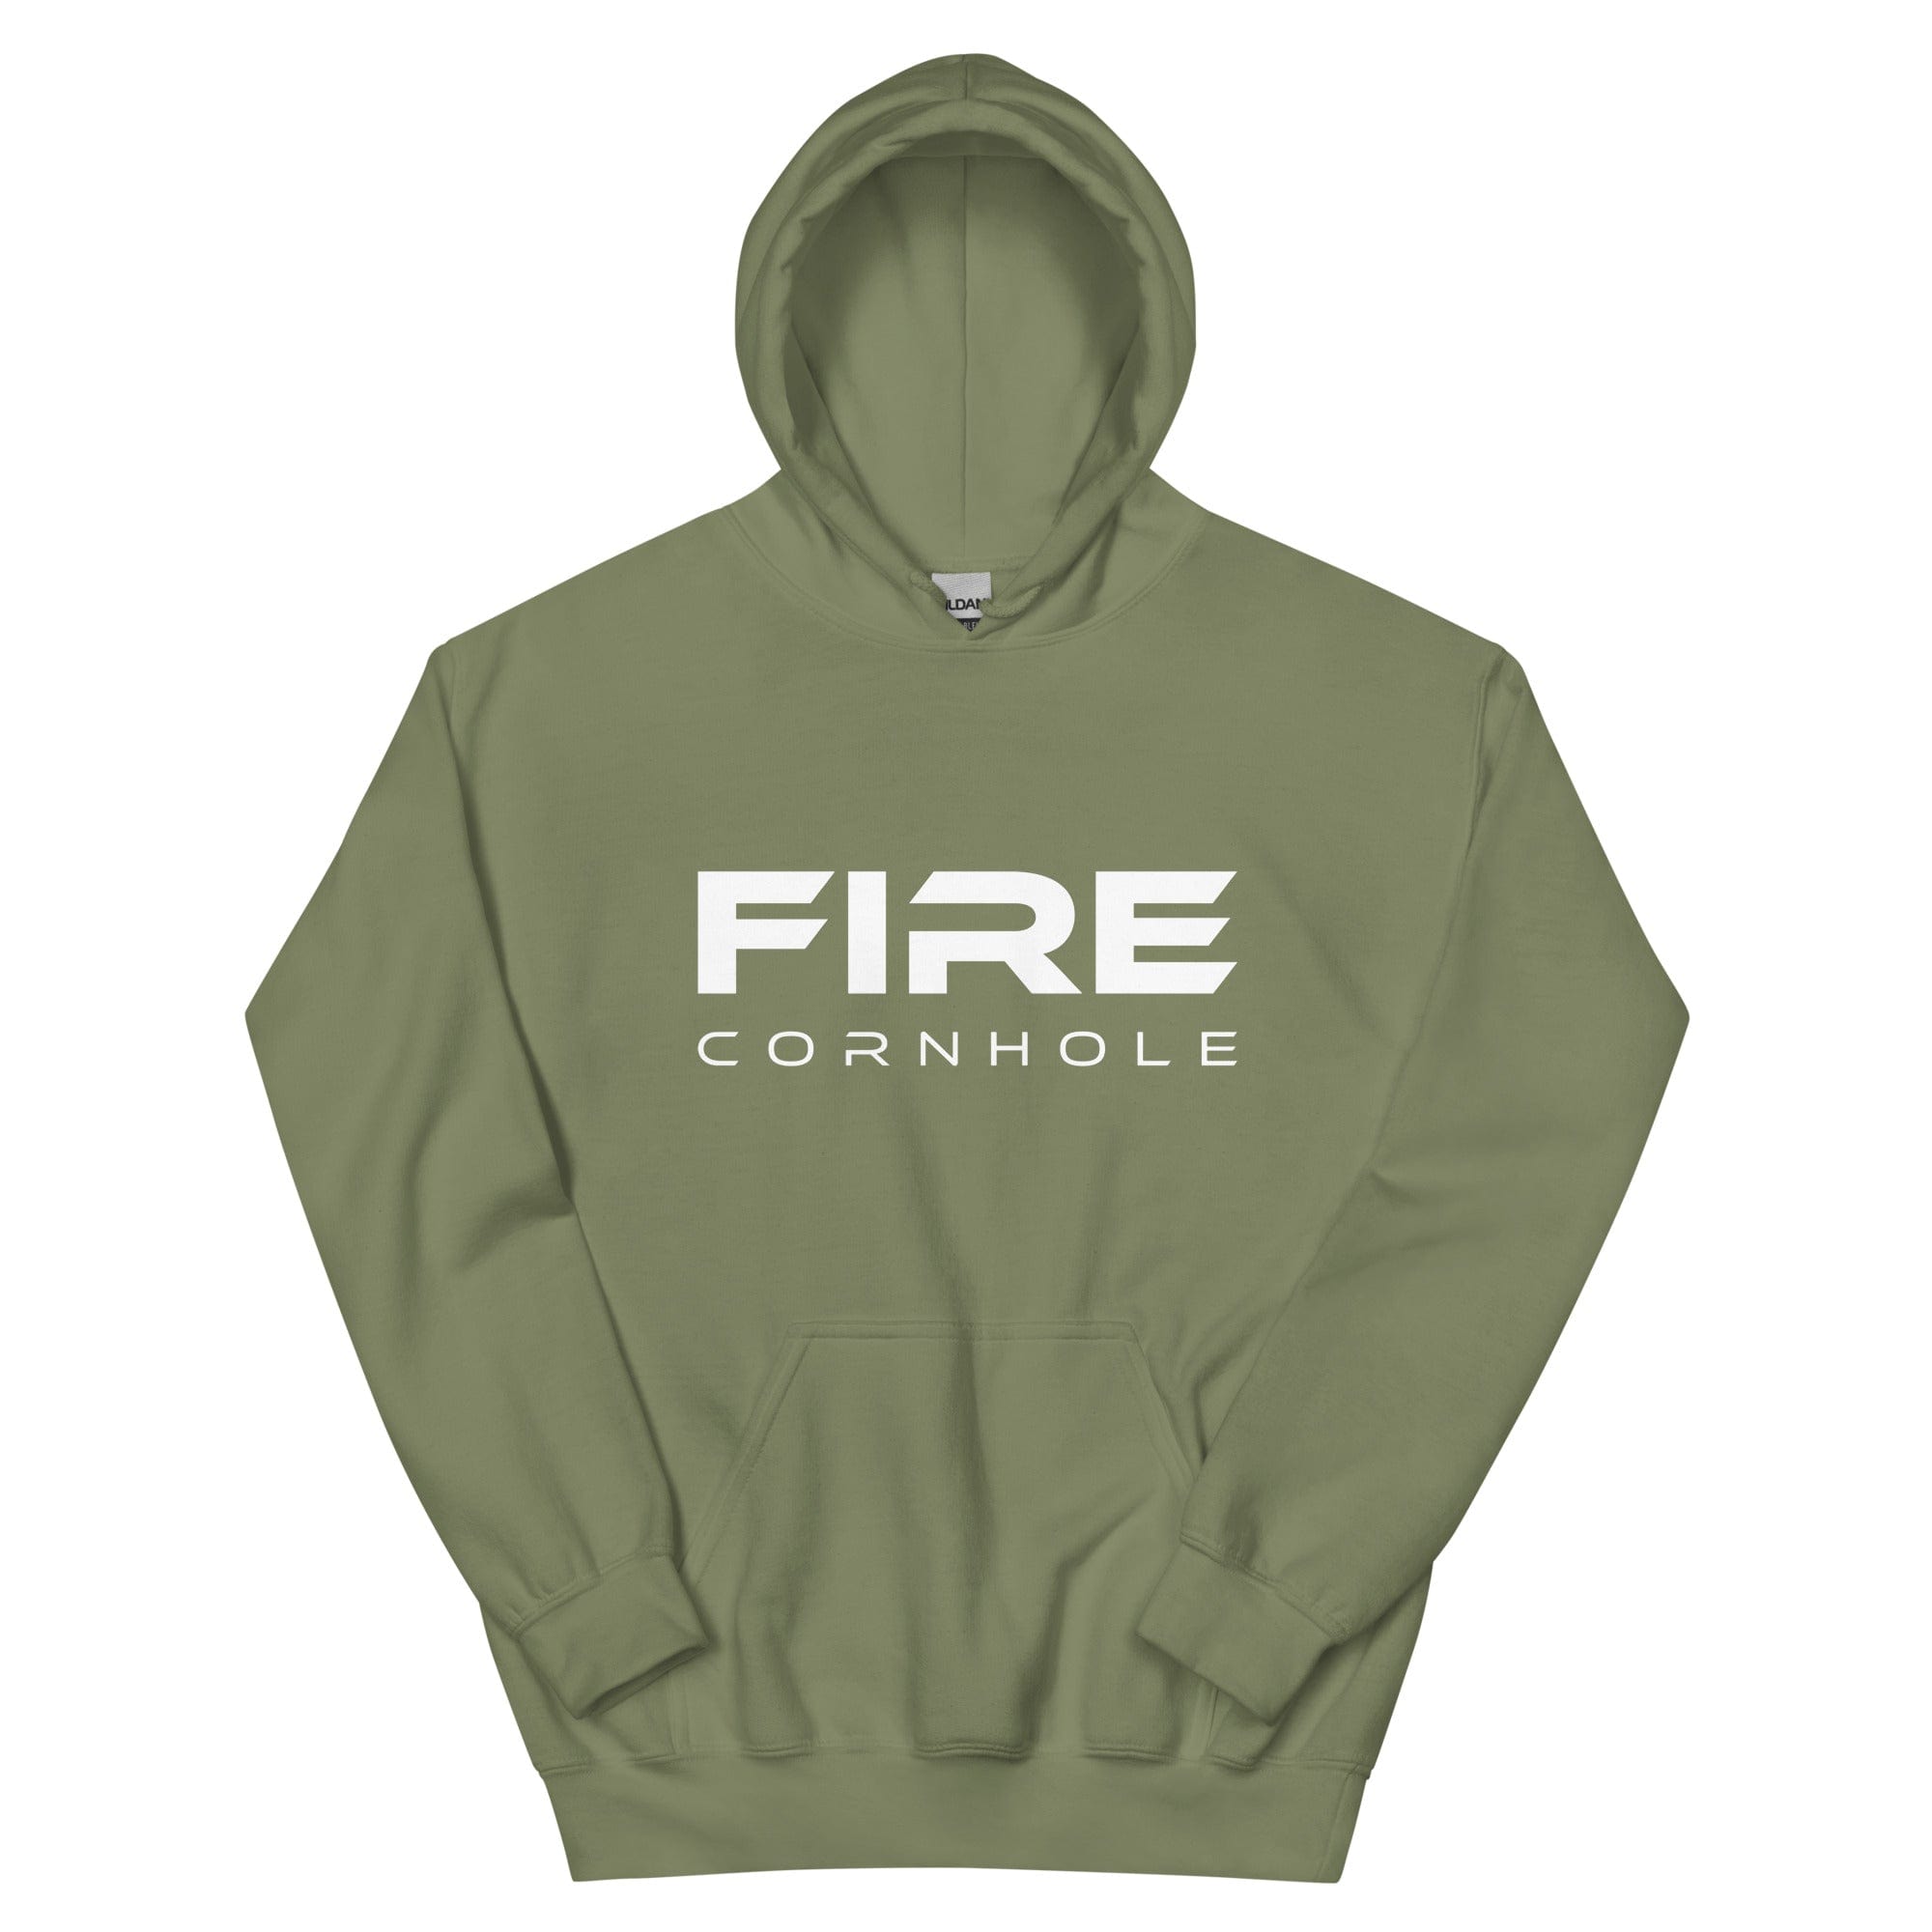 Forest green unisex cotton hoodie with Fire Cornhole logo in white